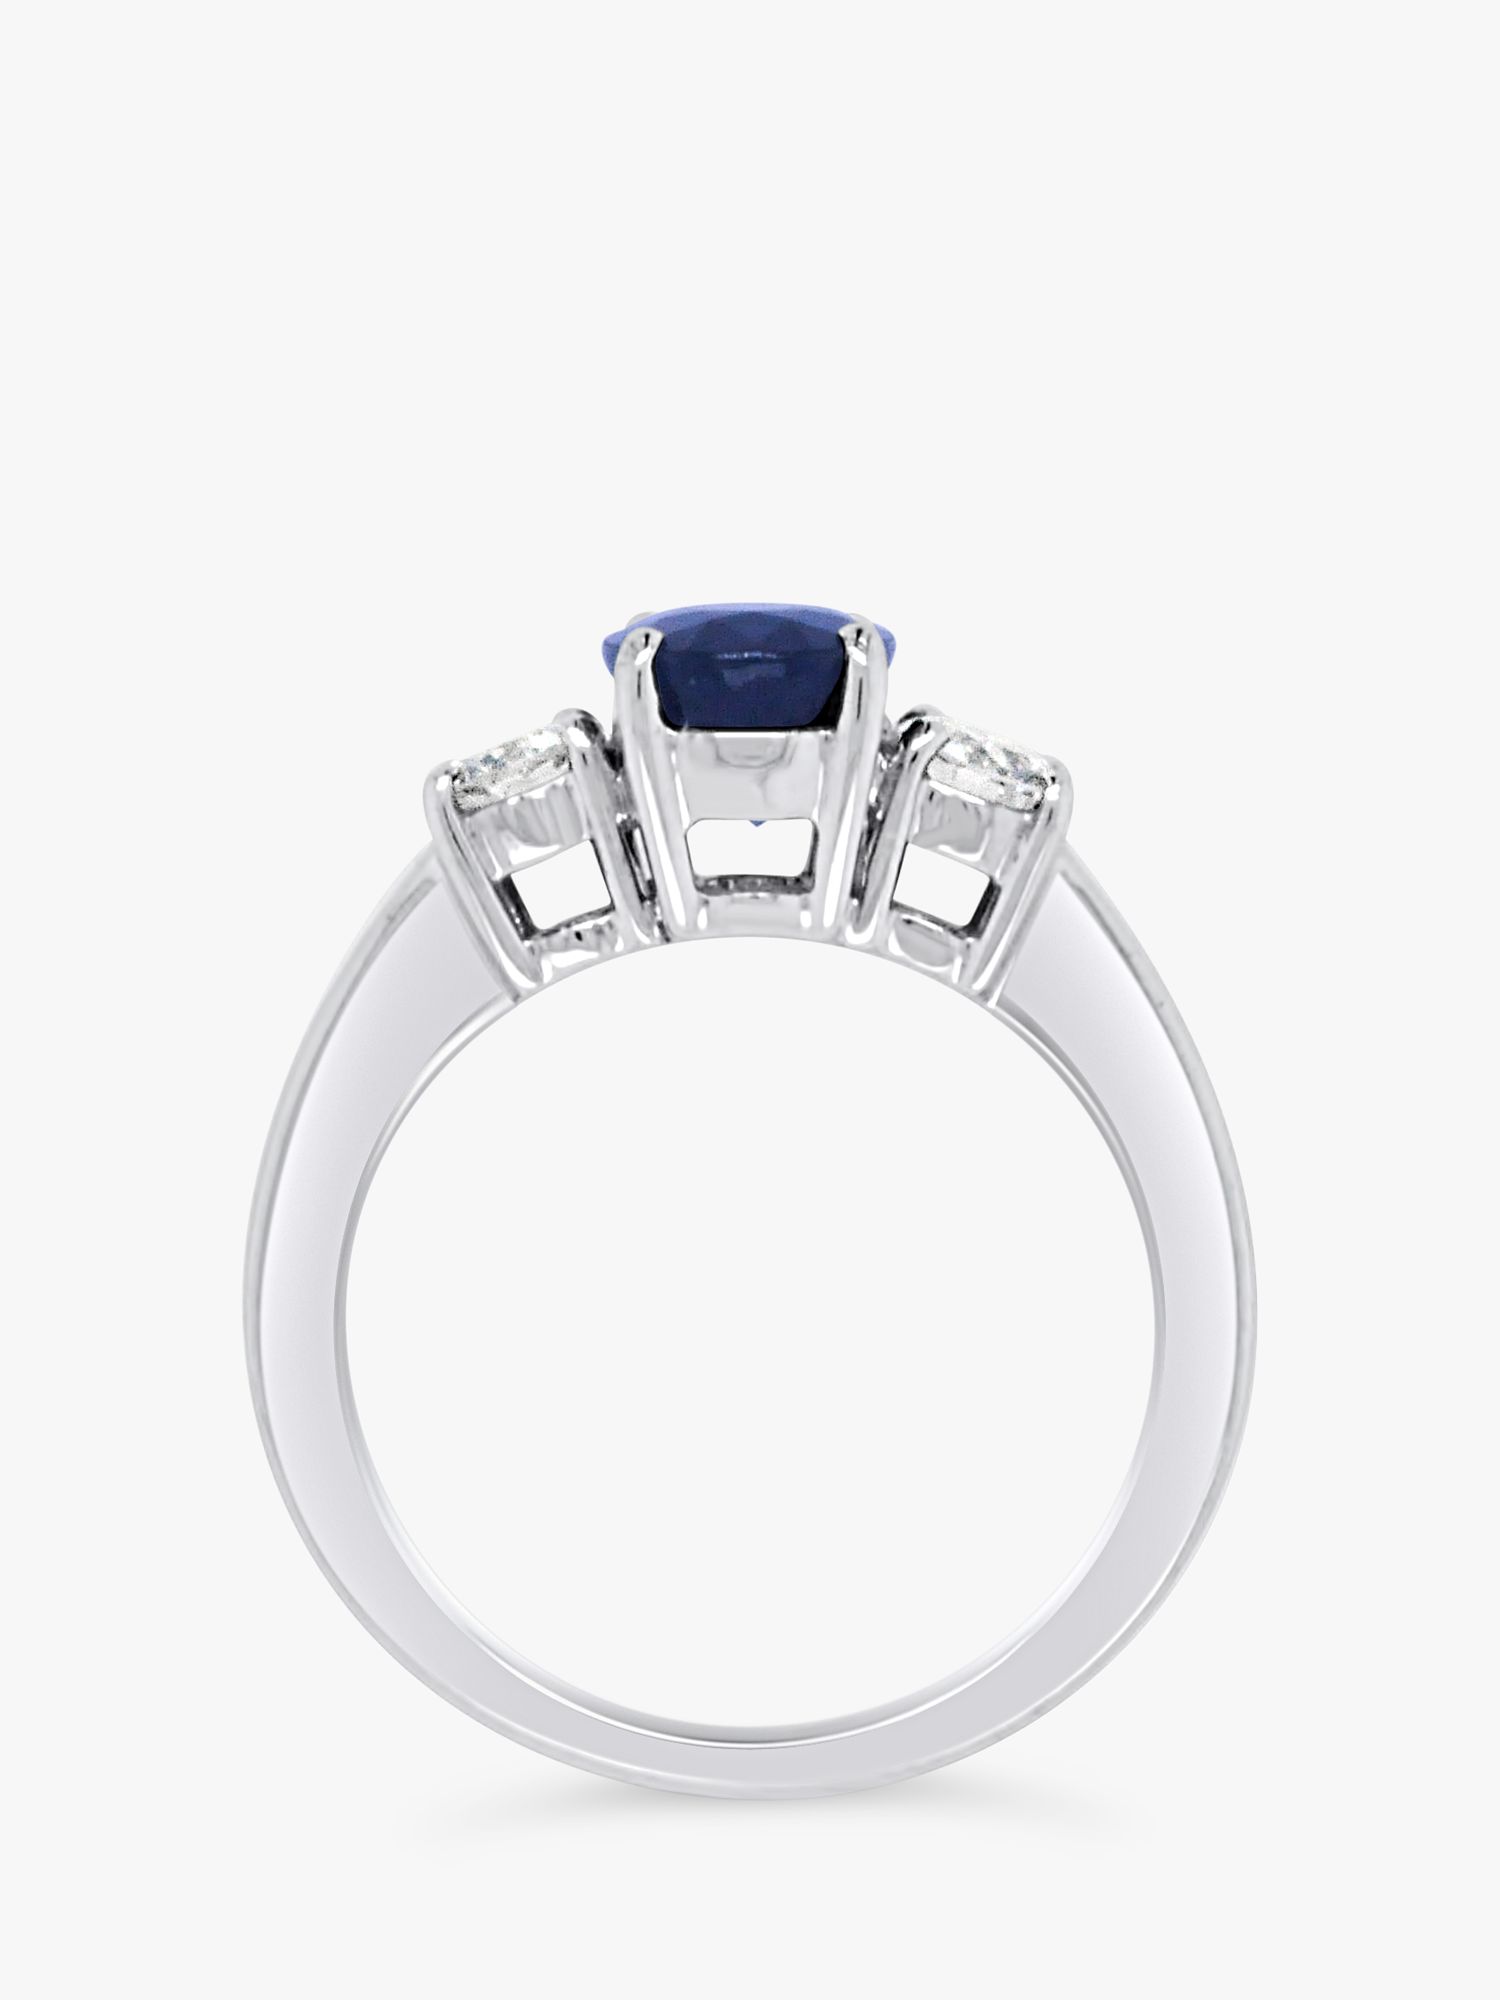 Buy Milton & Humble Jewellery 18ct White Gold  Second Hand Sapphire and Diamond Ring Online at johnlewis.com